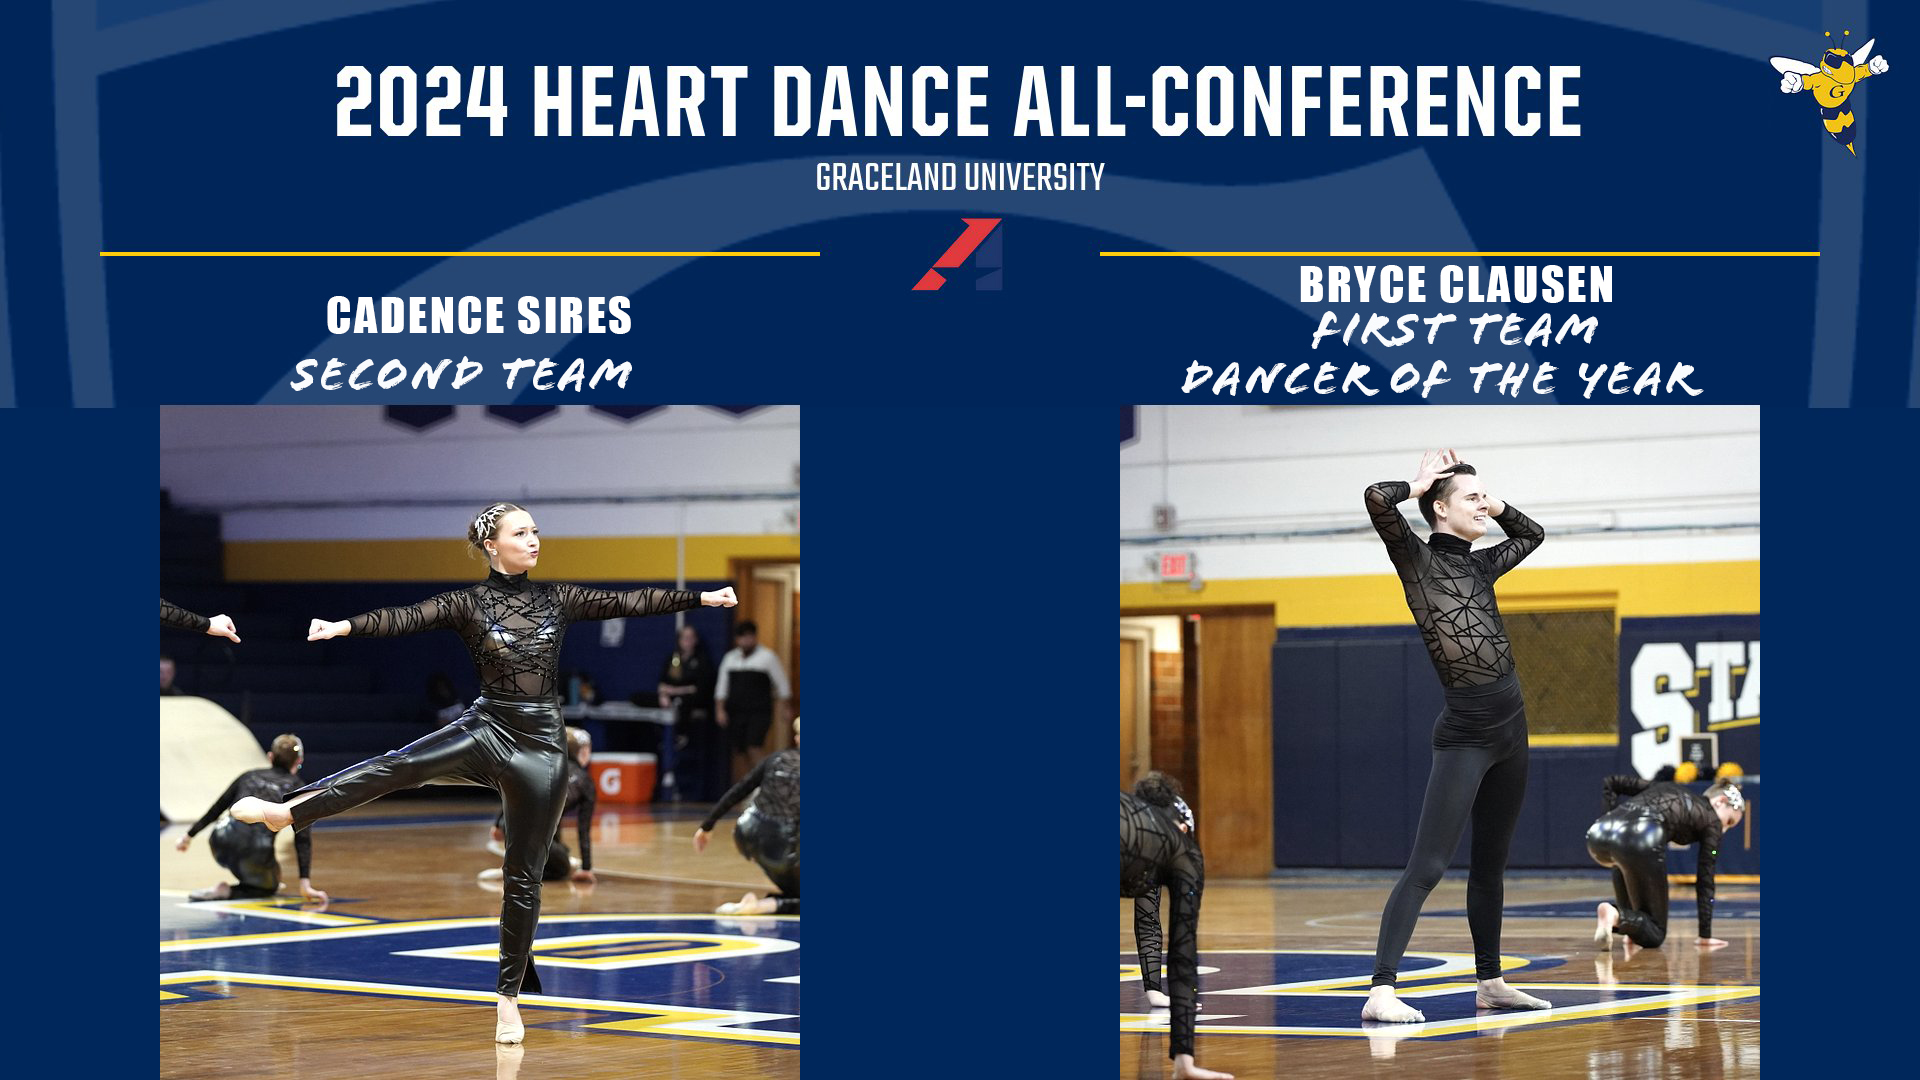 Gadets Place Fourth at the 2024 Heart Dance Championship